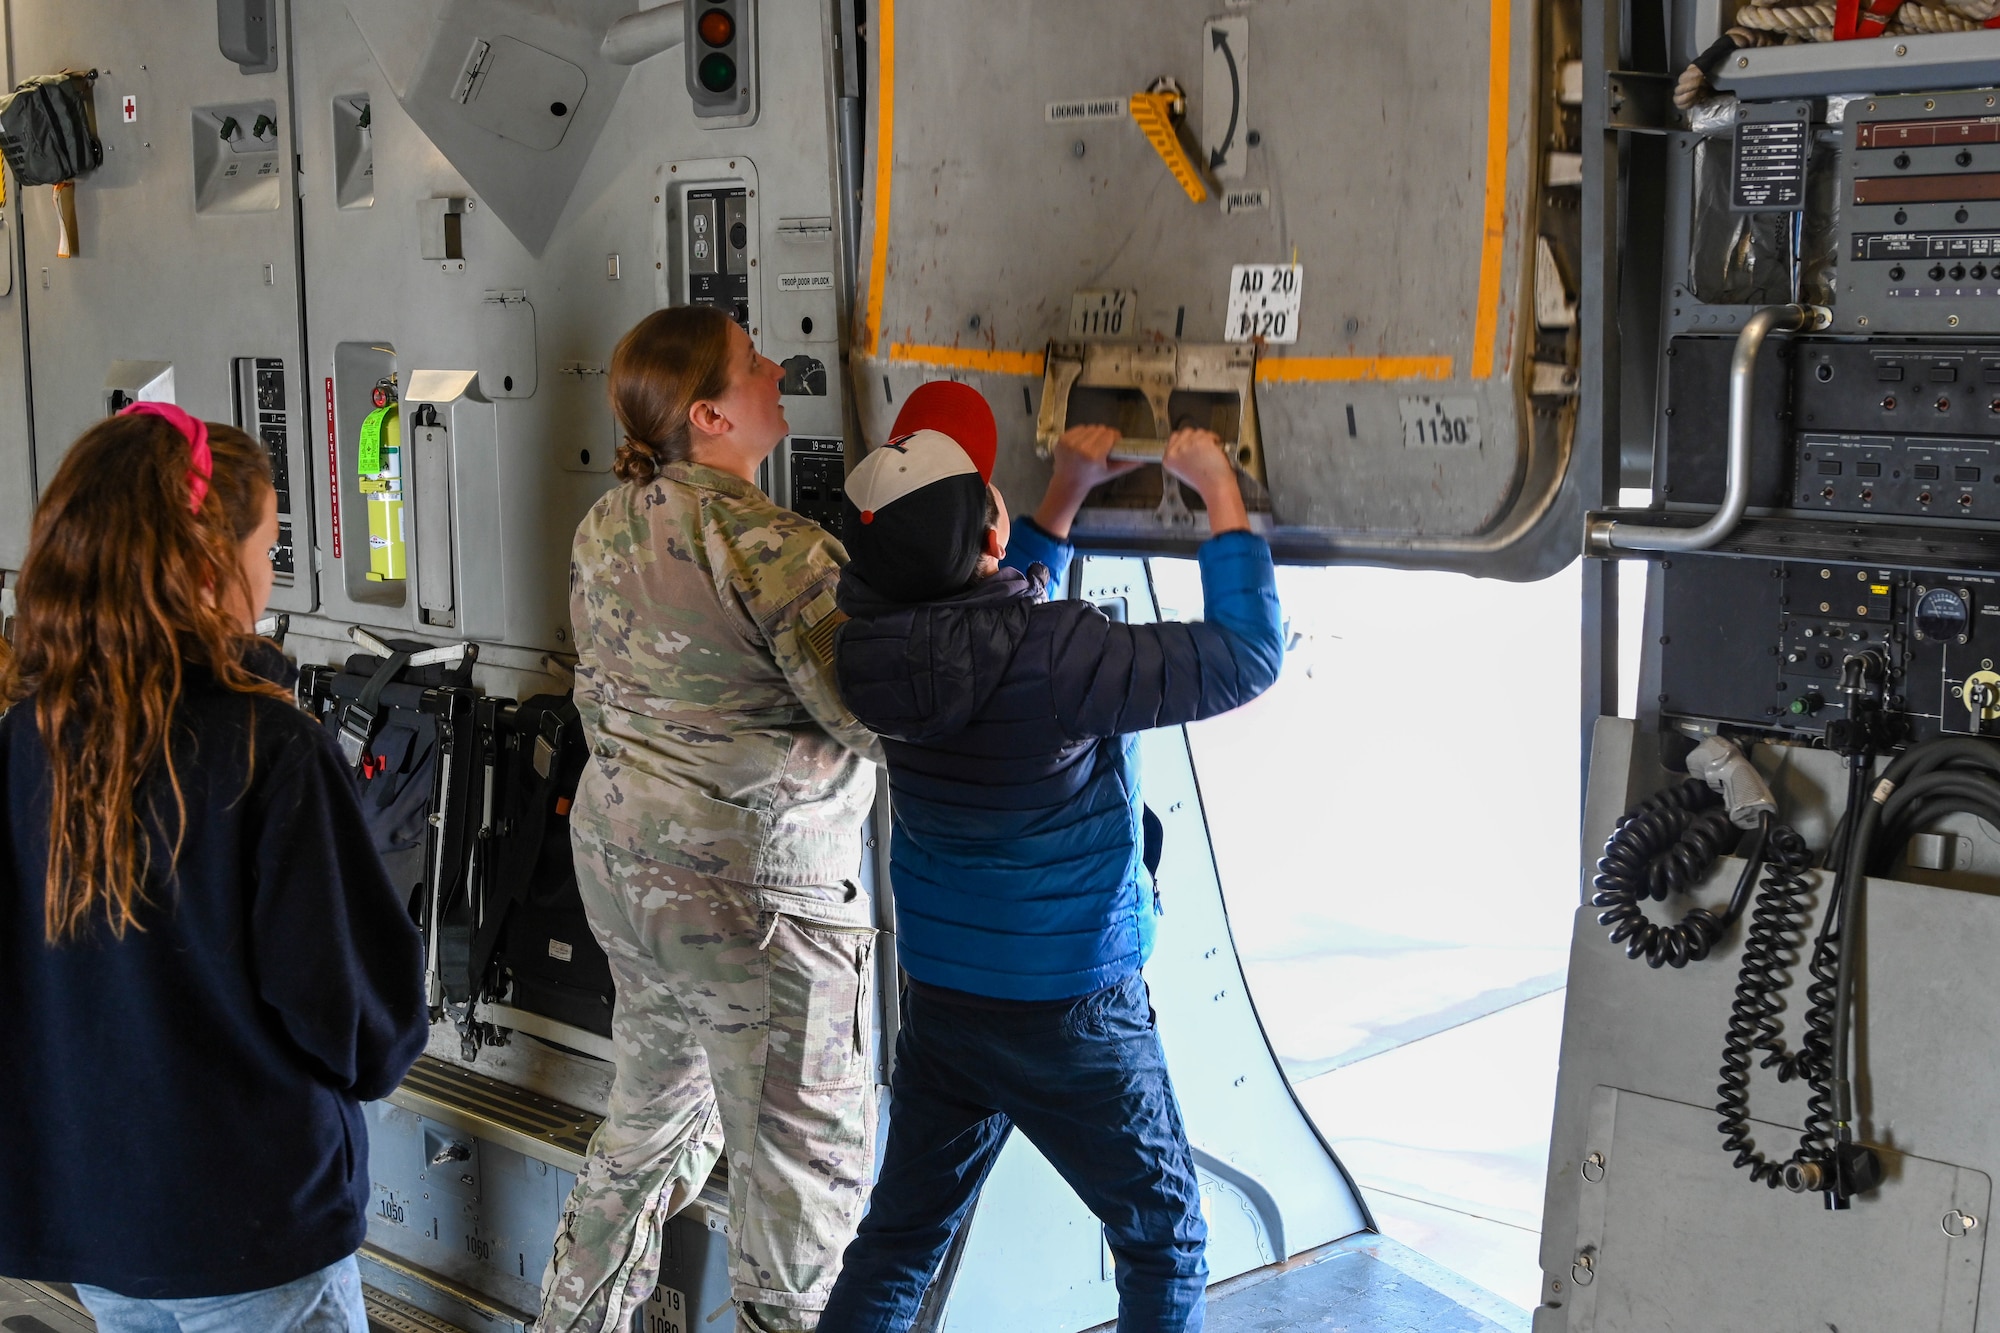 U.S. Air Force Staff Sgt. Jacquilyn Mermolia, 58th Airlift Squadron loadmaster instructor, helps Willam Guardiola open a troop door on a C-17 Globemaster III at Altus Air Force Base, Oklahoma, March 14, 2023. Mermolia demonstrated the functions of different parts of the aircraft to showcase C-17 operating procedures. (U.S. Air Force photo by Senior Airman Trenton Jancze)